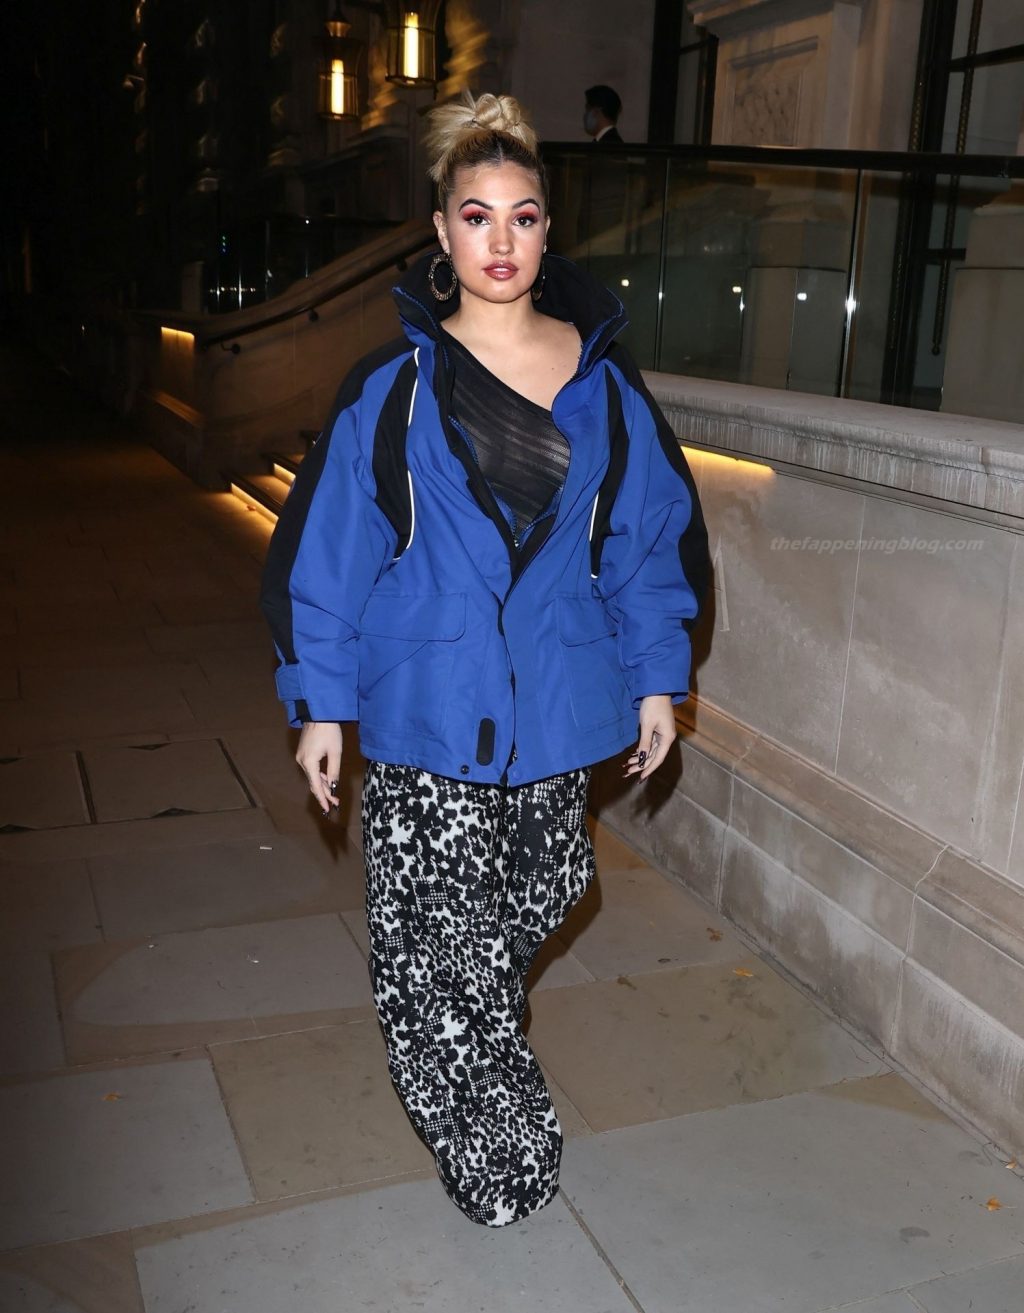 Mabel Looks sensational in a Mesh Top in London (10 Photos)